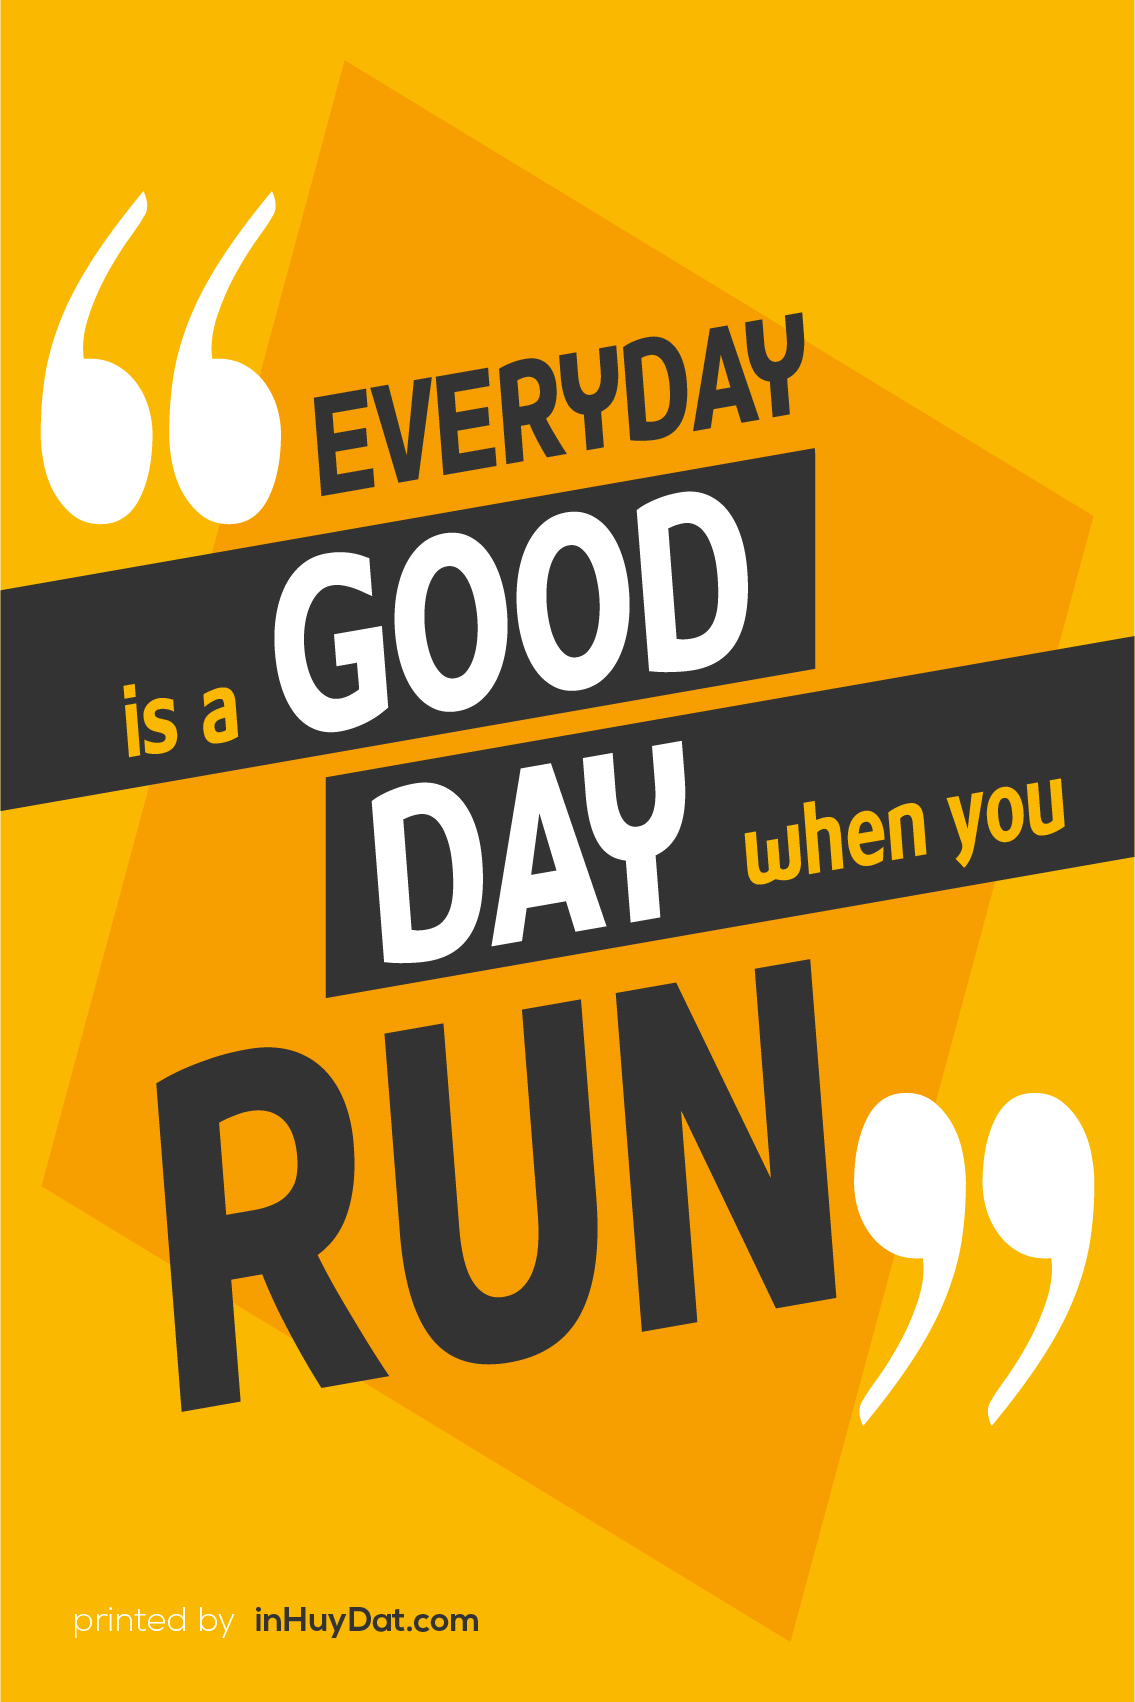 Tranh canvas hiện đại Everyday is a good day when you run